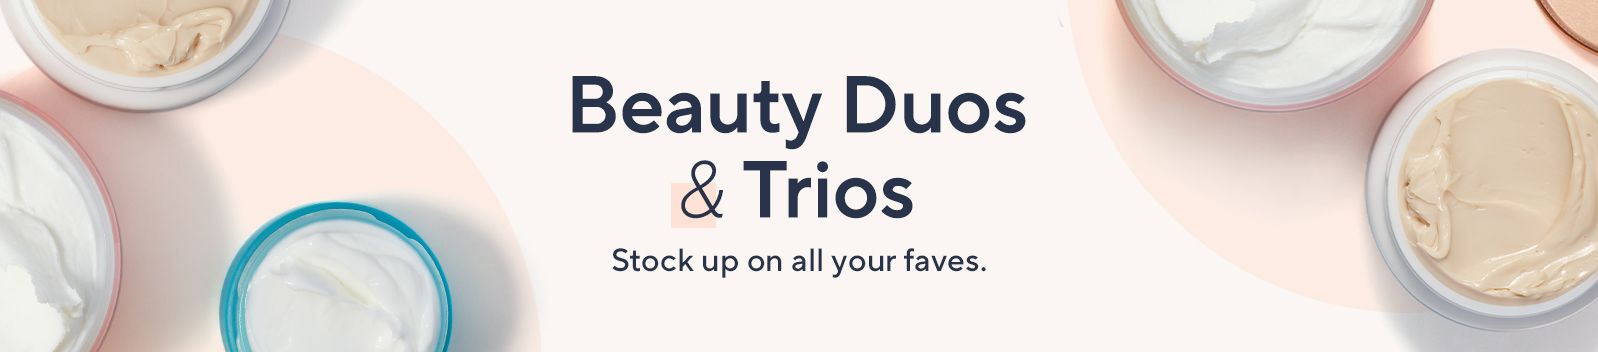 Beauty Duos & Trios Stock up on all your faves.